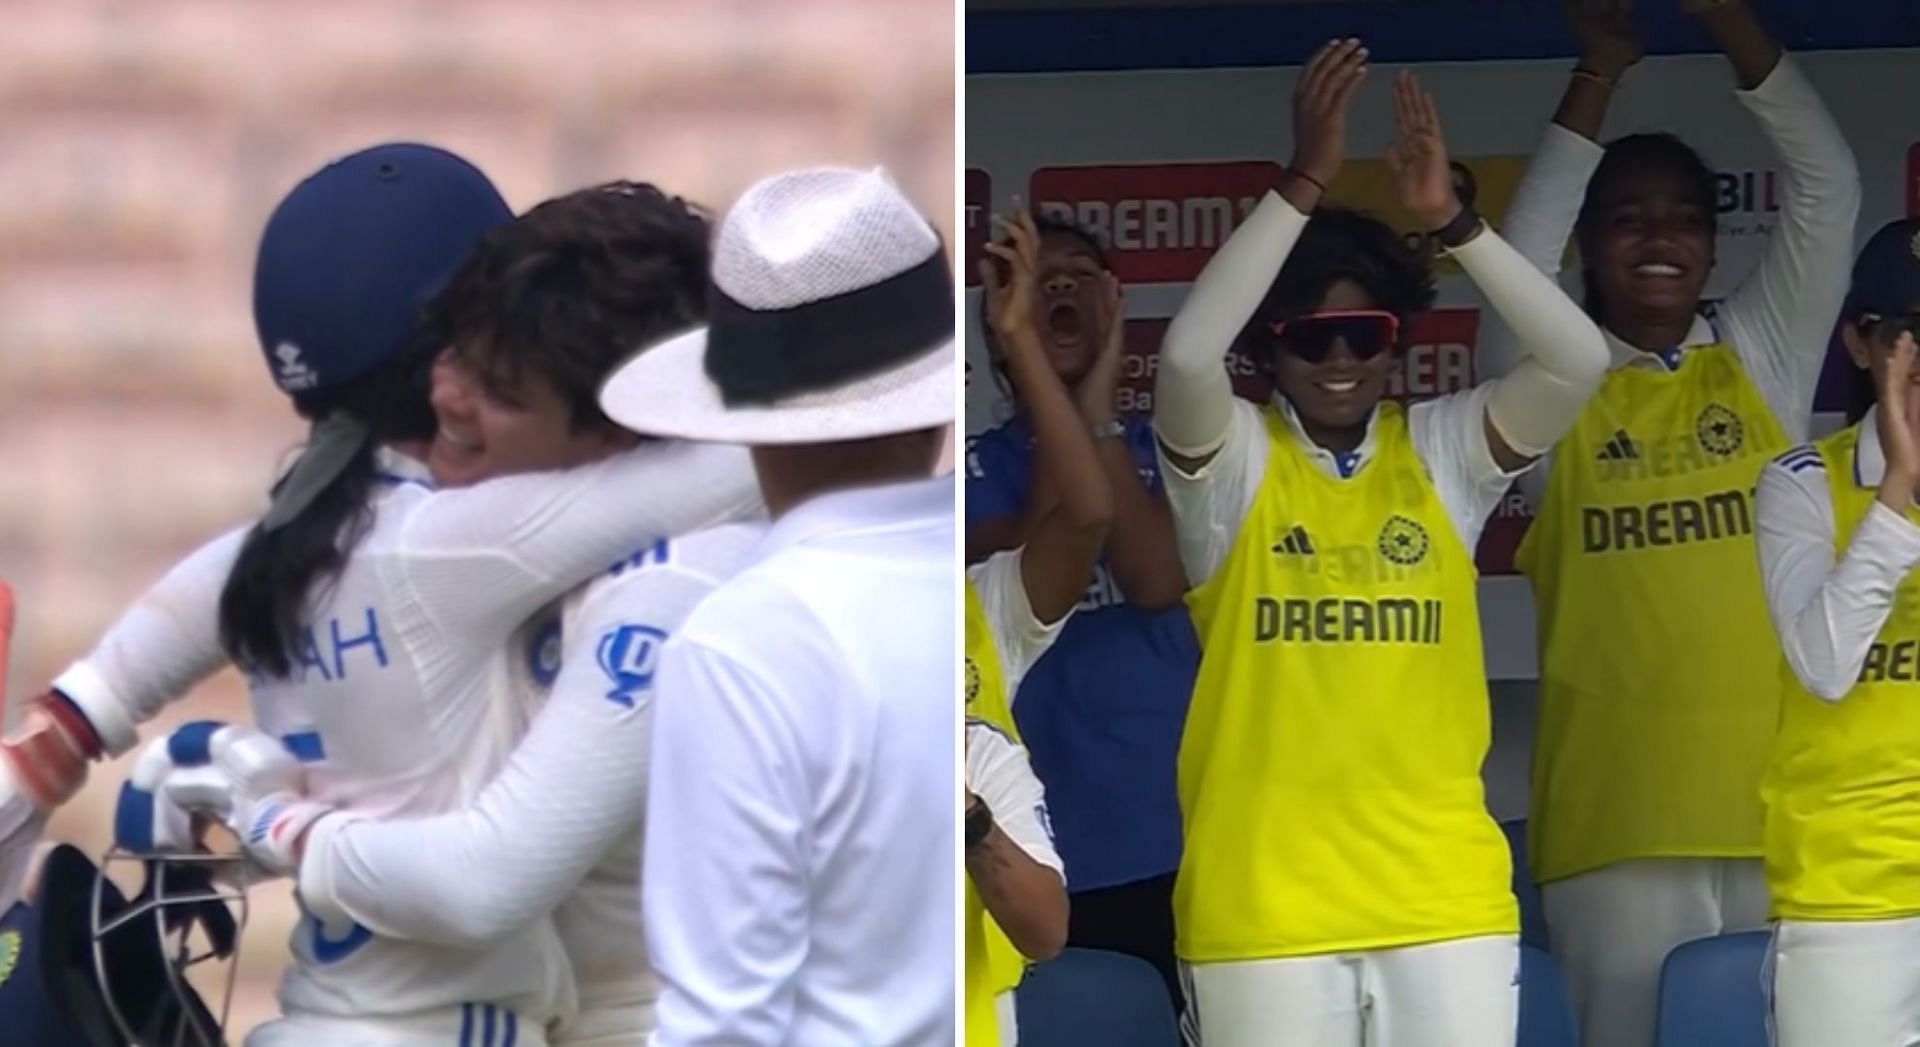 [Watch] 6,6 & 1 - Shafali Verma receives a rousing reception after registering fastest Women's double century during IND-W vs SA-W one-off Test